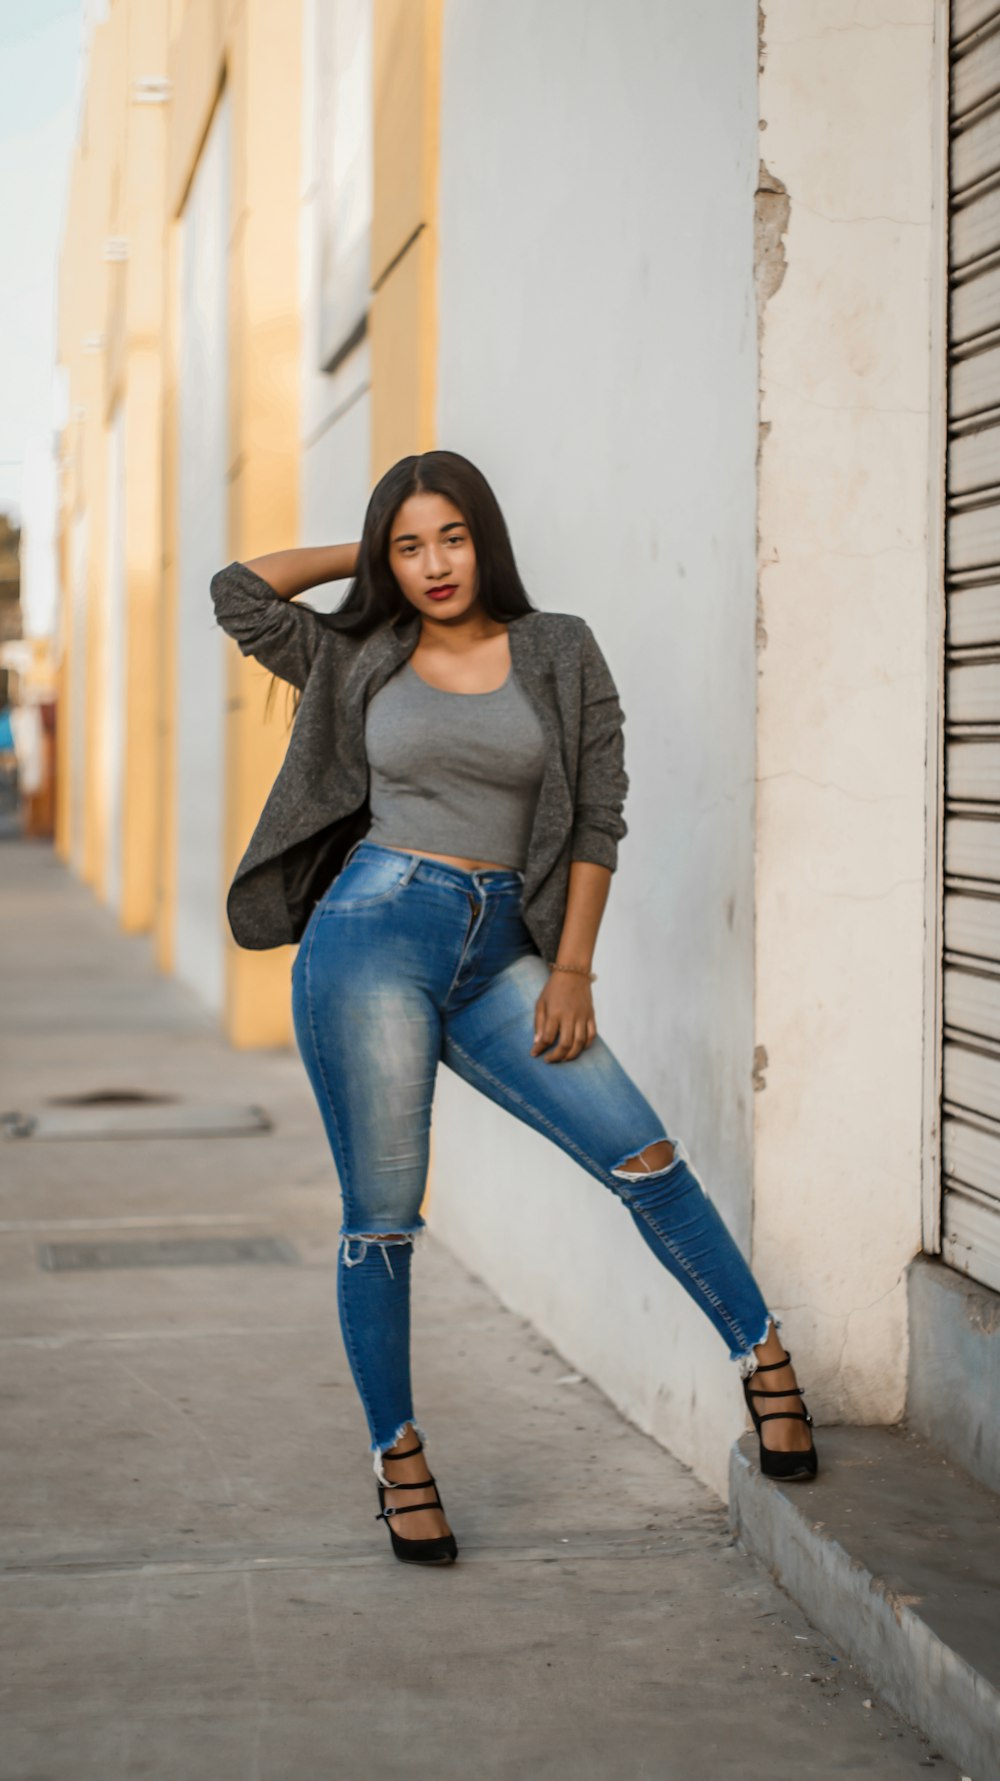 Premium Photo  Lady in long sleeve top. sandals and blue denim